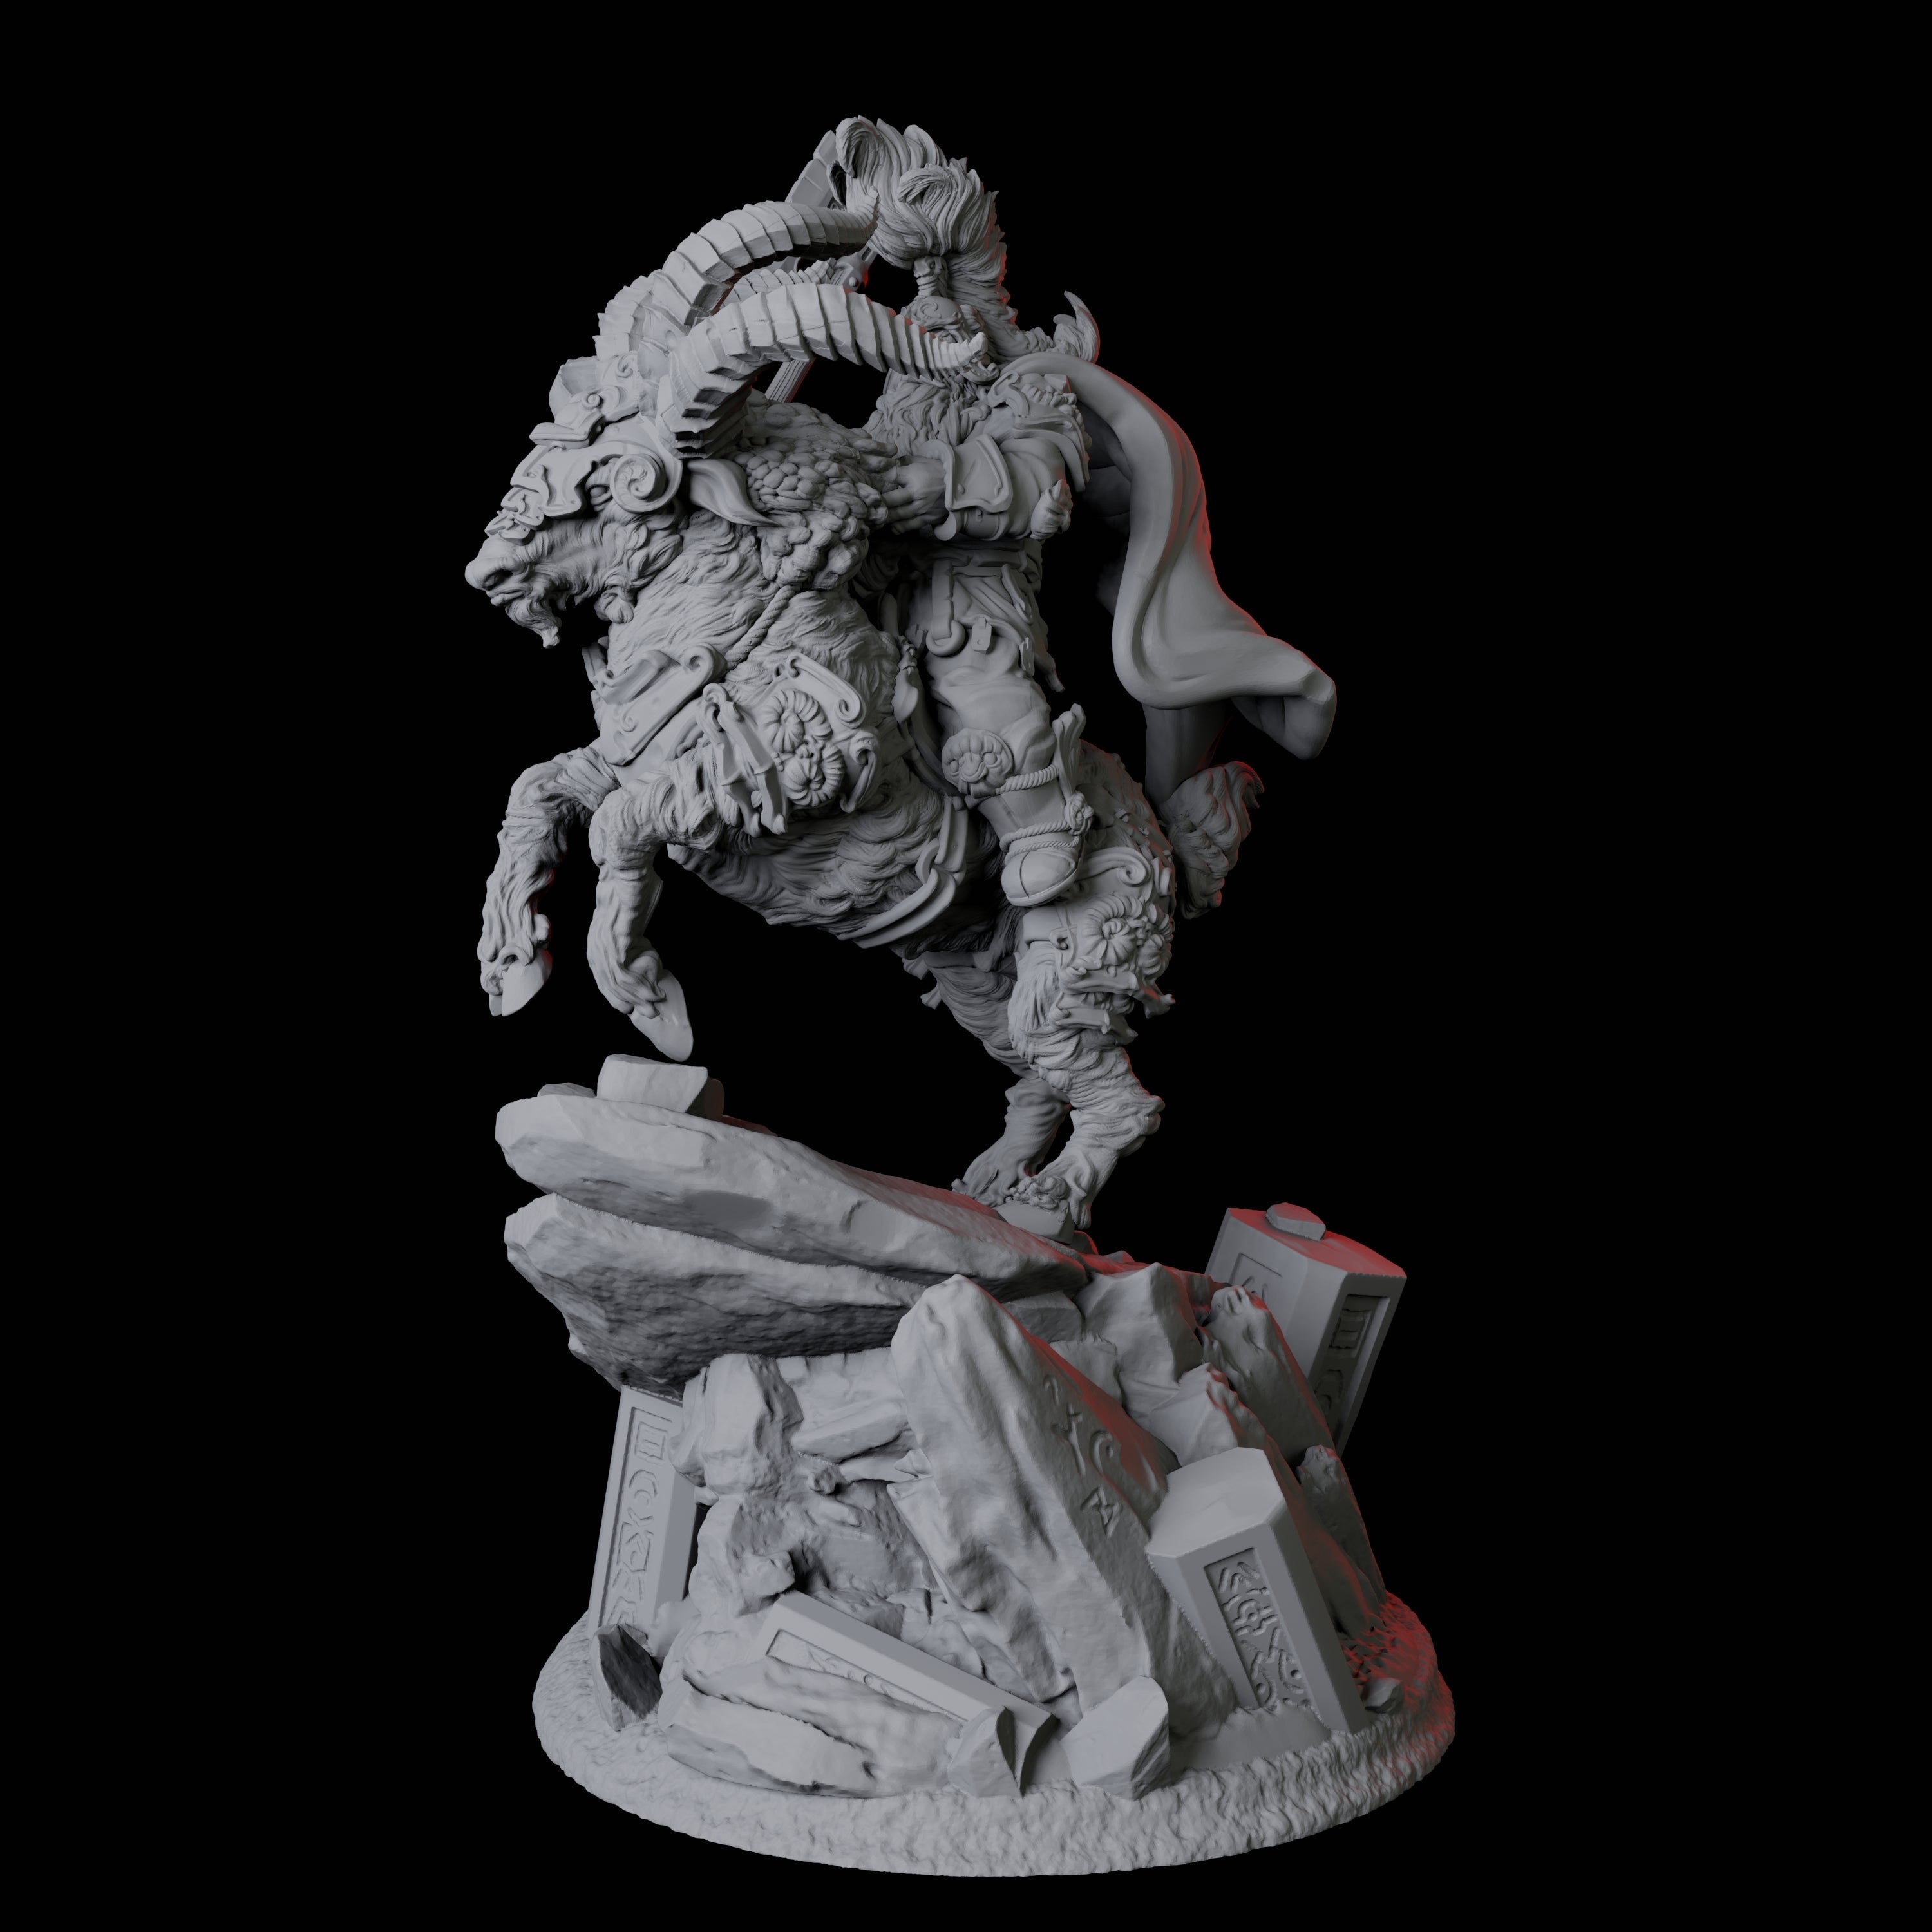 Goat Mounted Dwarf Warrior A Miniature for Dungeons and Dragons, Pathfinder or other TTRPGs